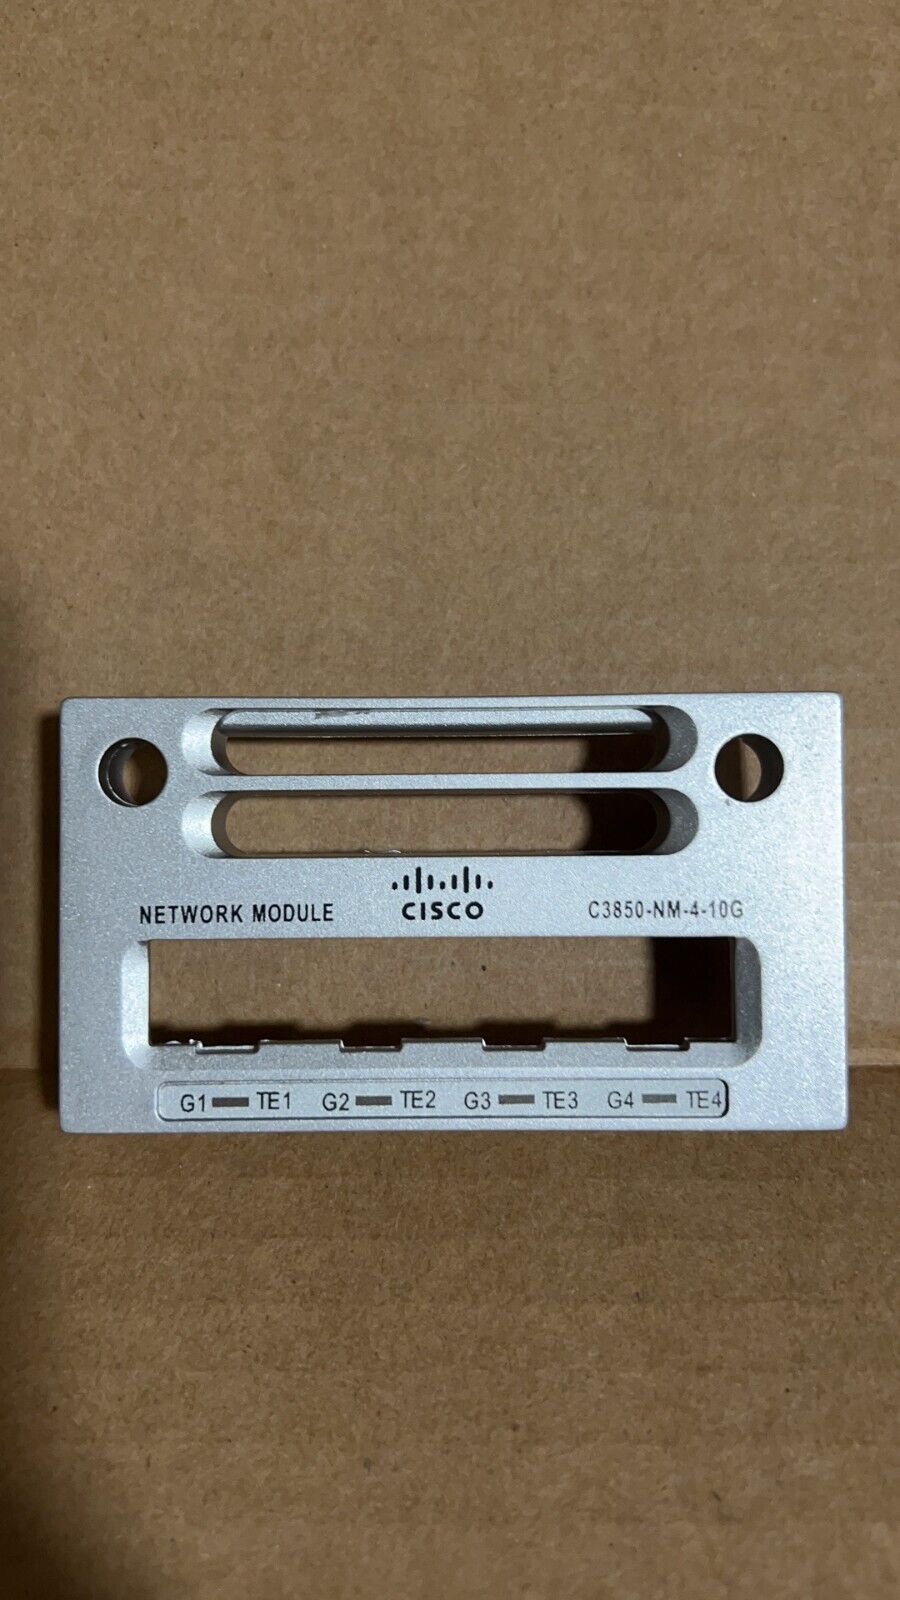 Cisco C3850-NM-4-10G Model Faceplate for Replacement